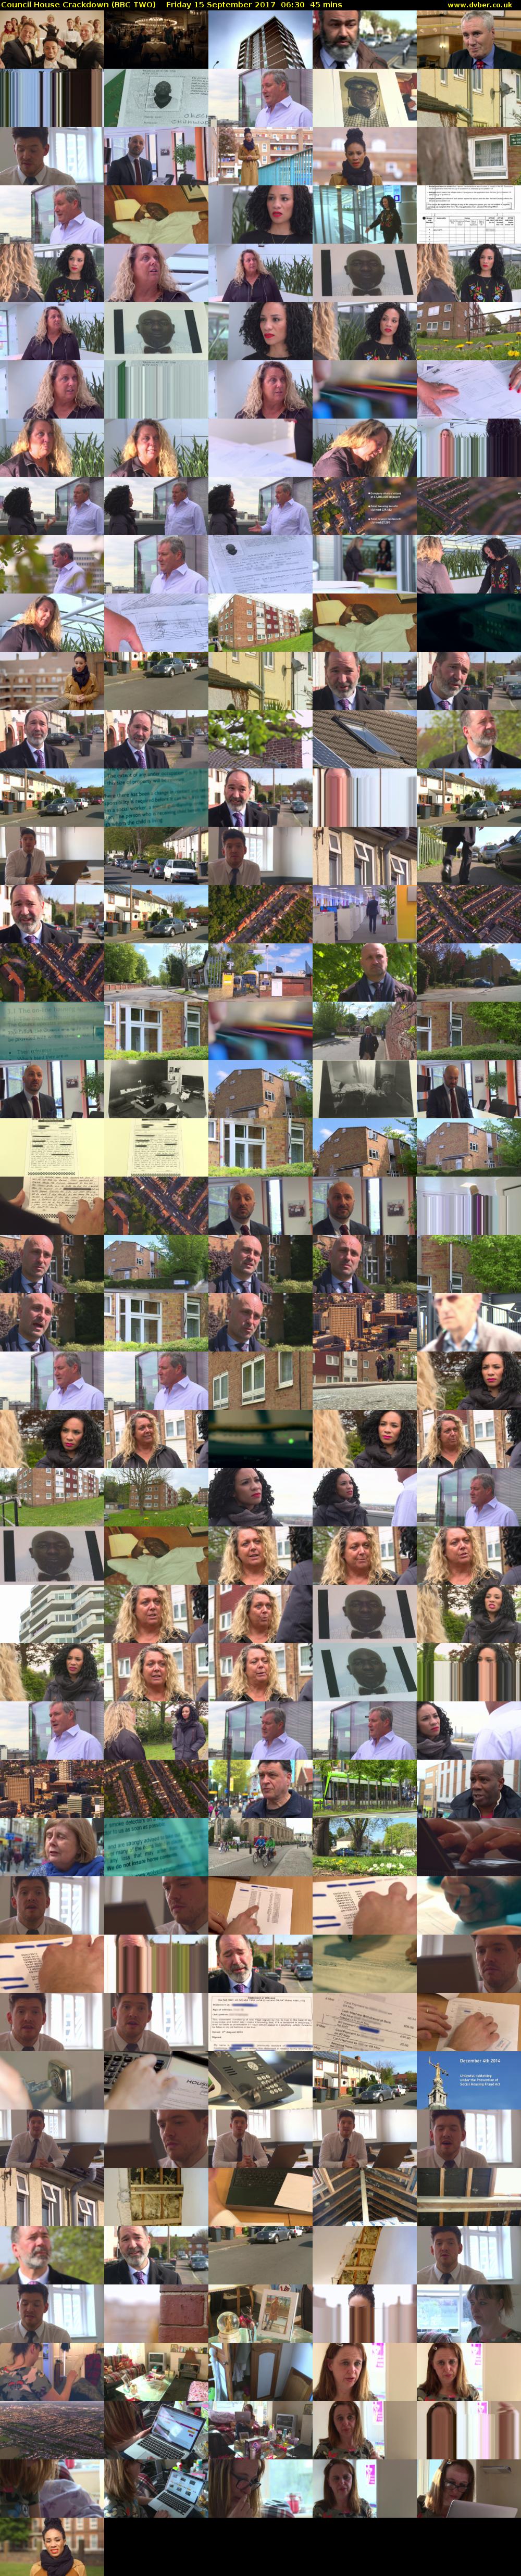 Council House Crackdown (BBC TWO) Friday 15 September 2017 06:30 - 07:15